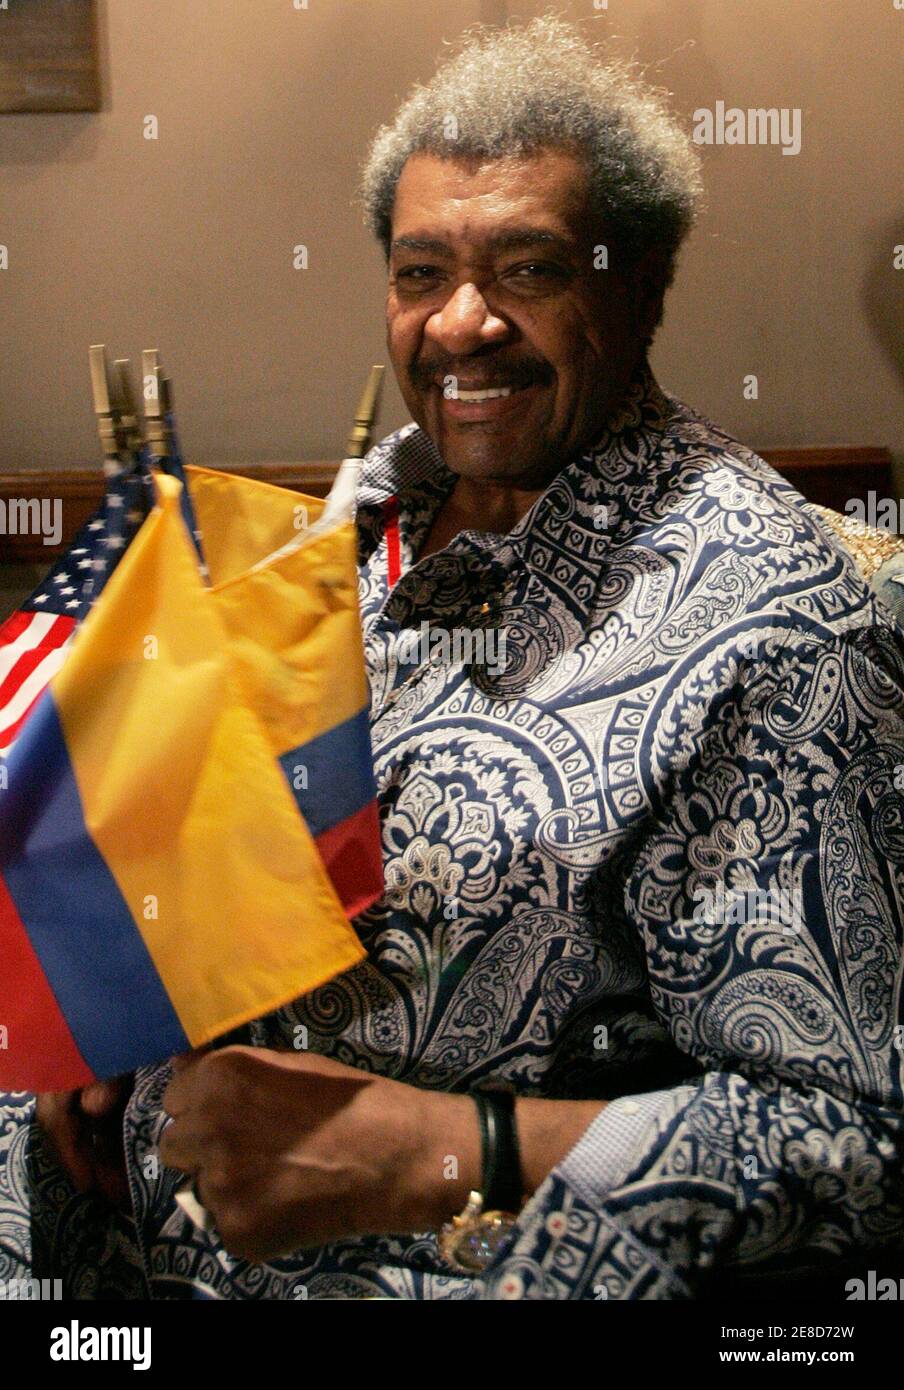 Boxing promoter Don King arrives for a news conference at Dann Carton hotel during the 88th WBA Annual Convention in Medellin November 18, 2009.  REUTERS/Albeiro Lopera (COLOMBIA SPORT BOXING) Stock Photo